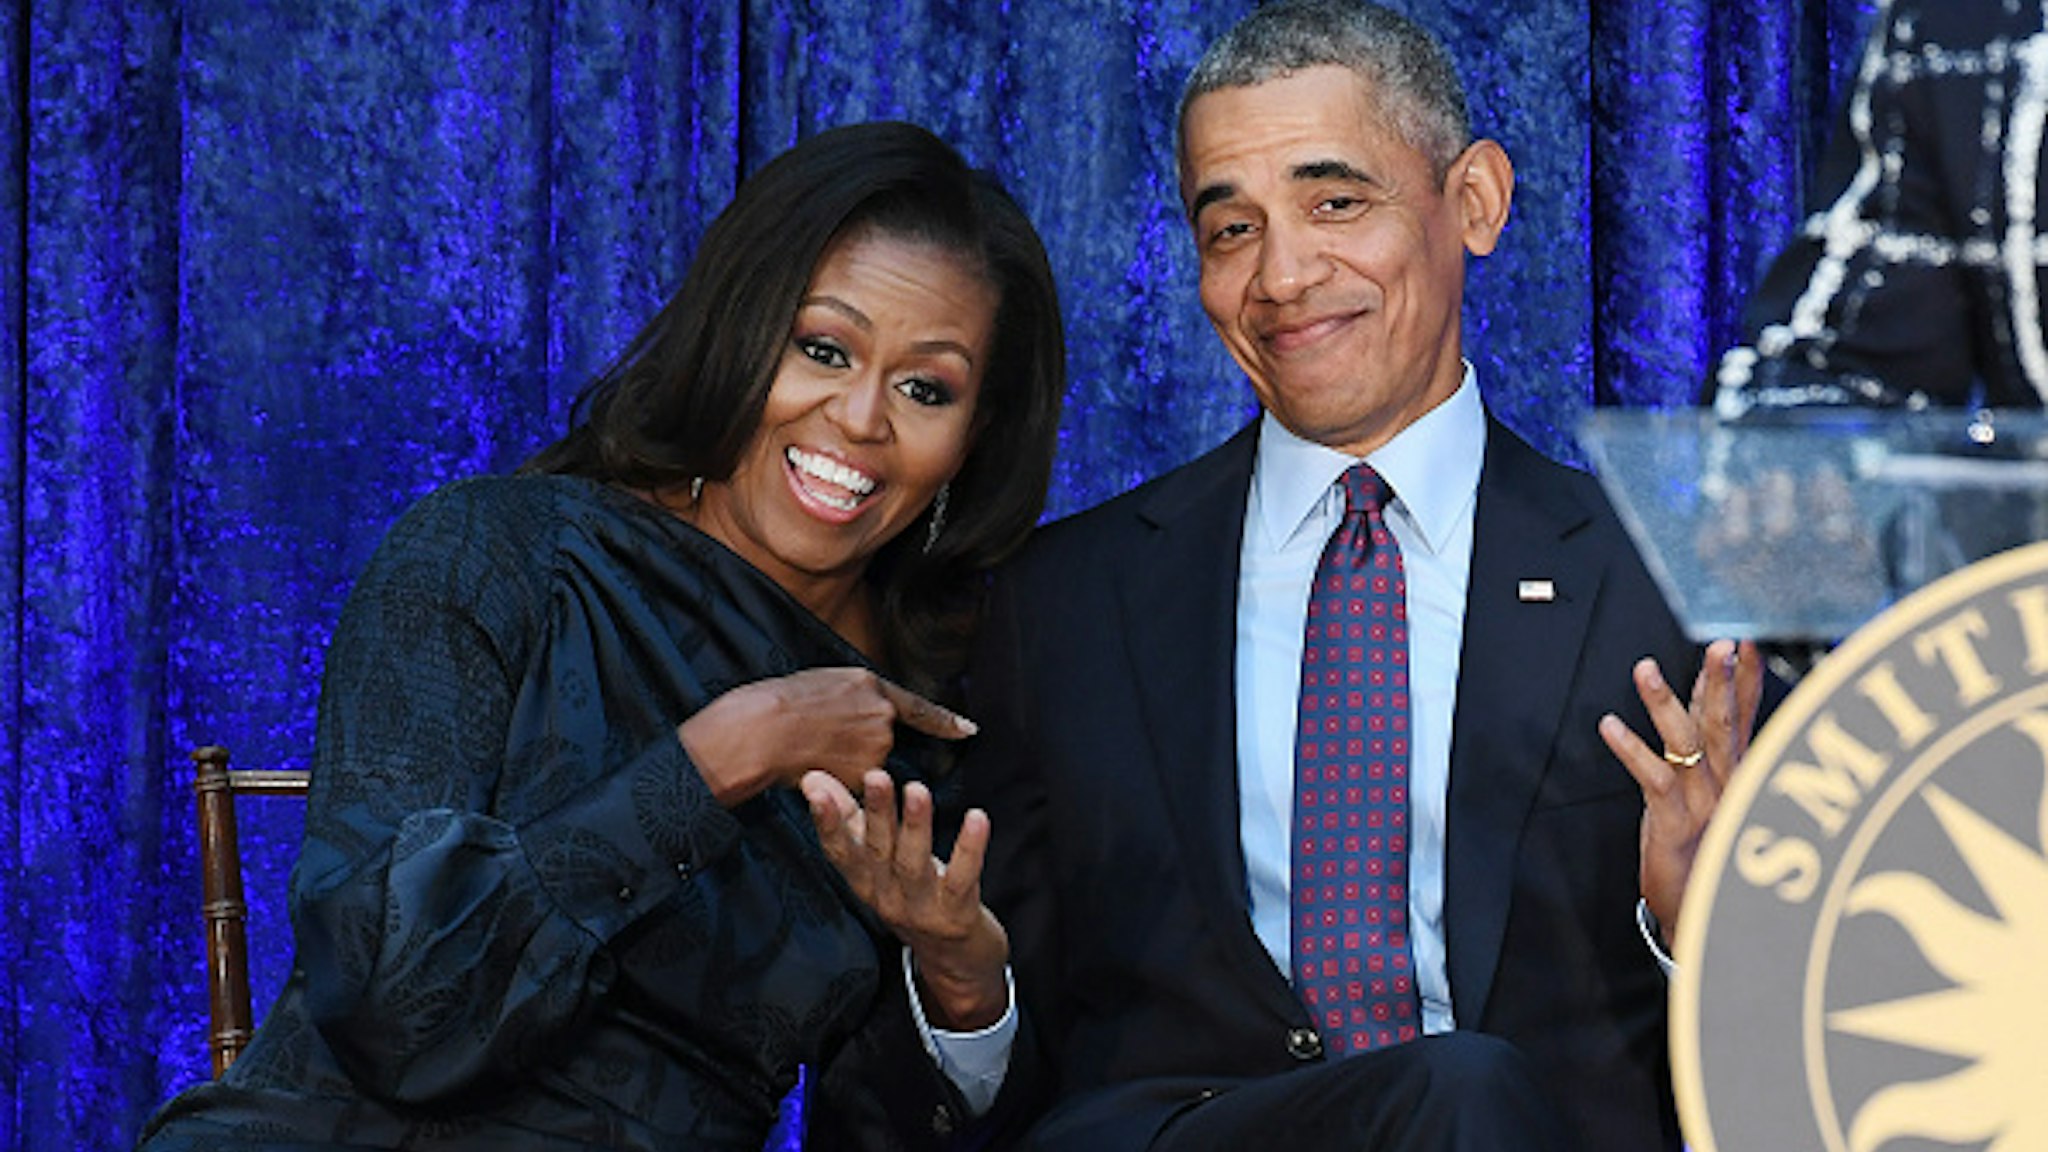 WASHINGTON, DC - FEBRUARY 12: Former First Lady Michelle Obama and former President Barack Obama are seen after their portraits were unveiled at the Smithsonian National Portrait Gallery on Monday February 12, 2018 in Washington, DC. The former President's portrait was painted by Kehinde Wiley while the former First Lady's portrait was painted by Amy Sherald.